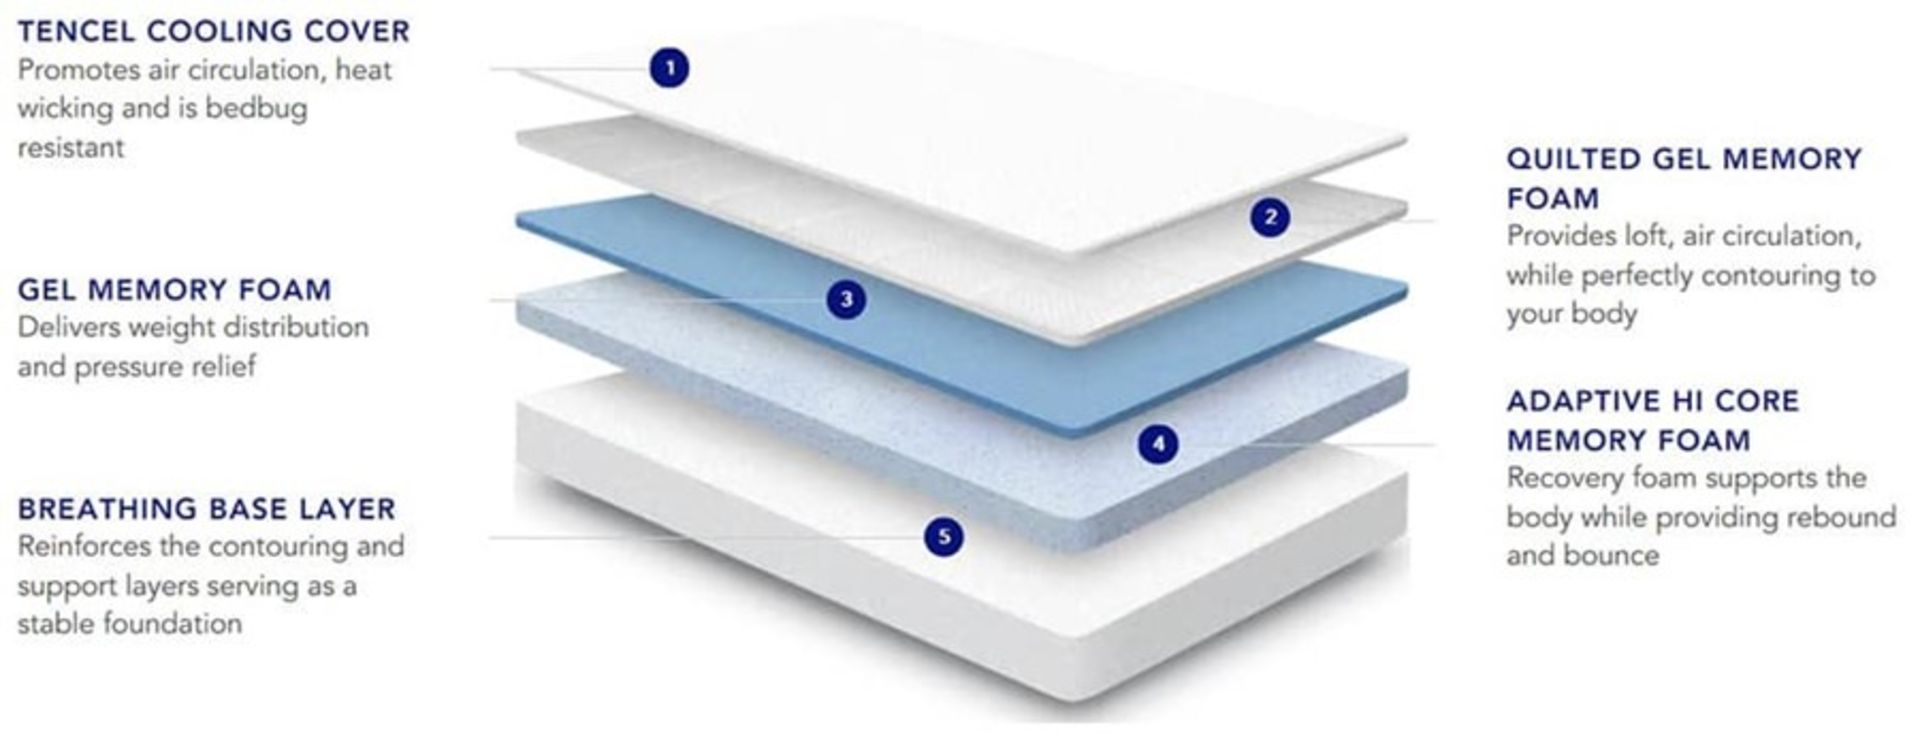 Nectar Professionally Refurbished Smart Pressure Relieving Double size Memory Foam Mattress, This - Image 2 of 2